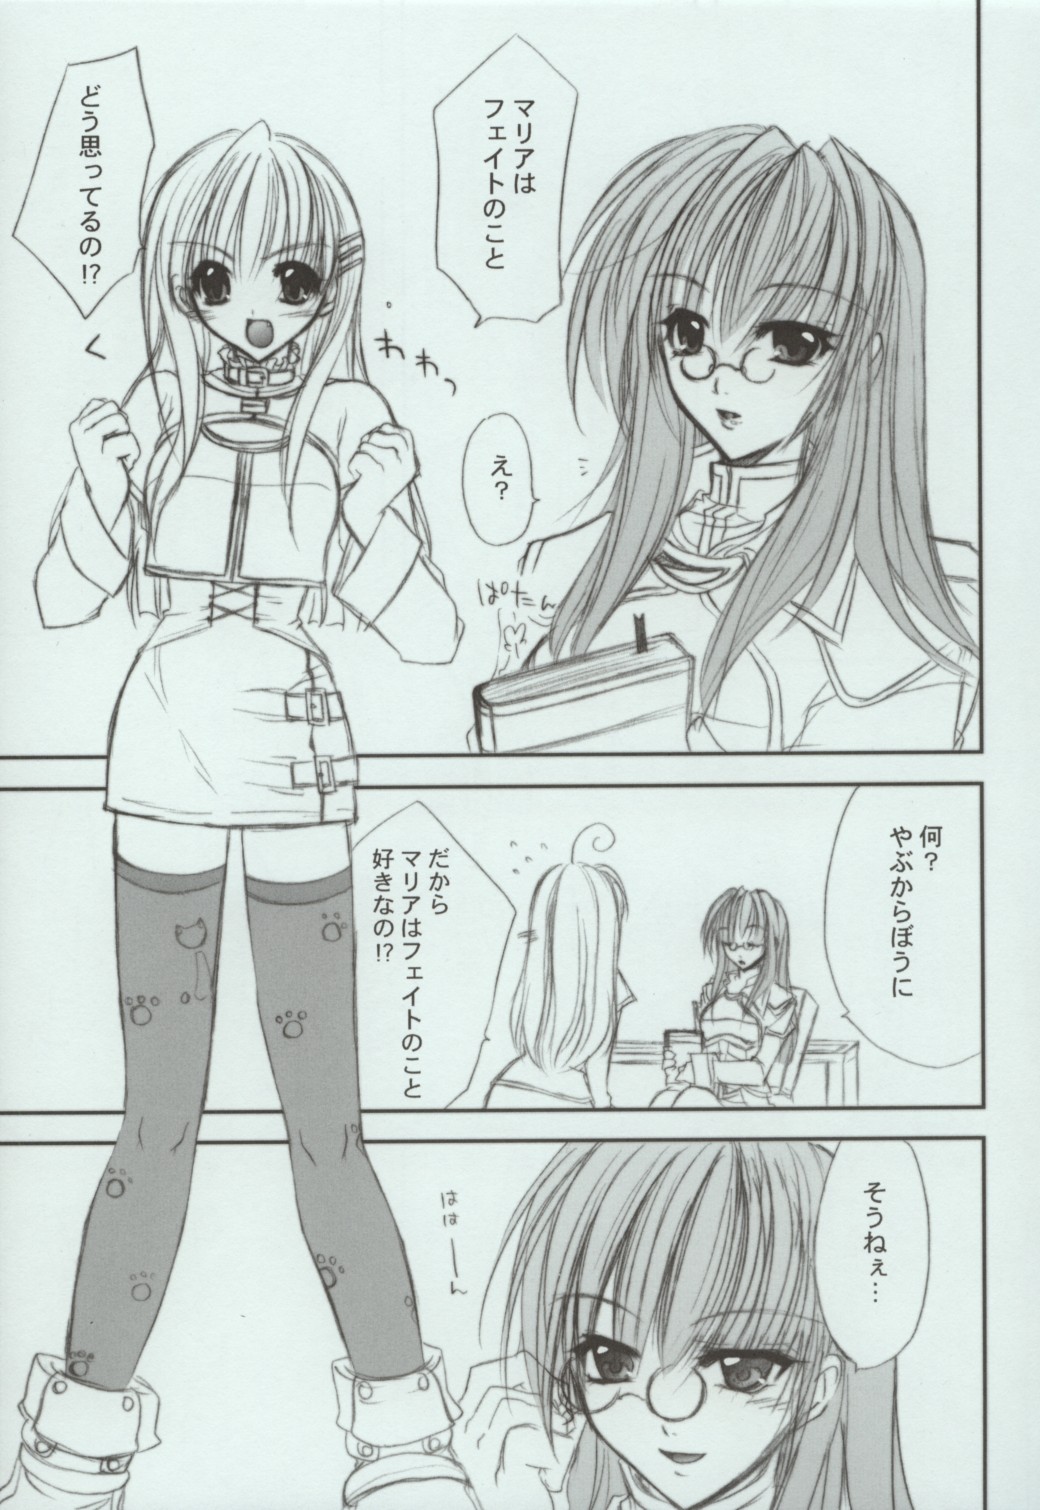 [Fantasy Wind (Shinano Yura)] FOLLOW (Star Ocean: Till the End of Time) page 4 full